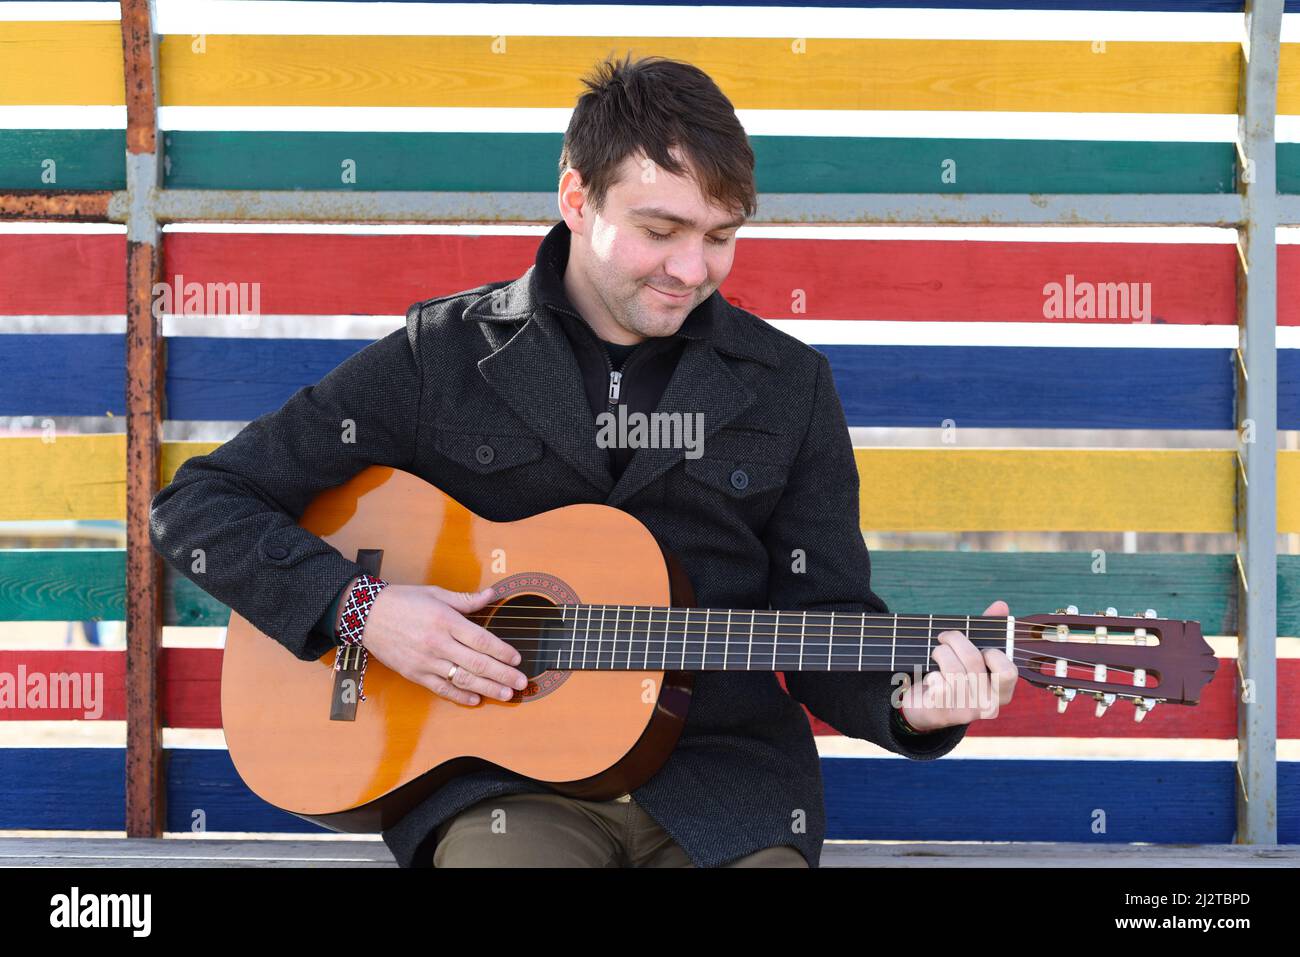 Smiling young man playing guitar and sitting against colorful wall Stock Photo